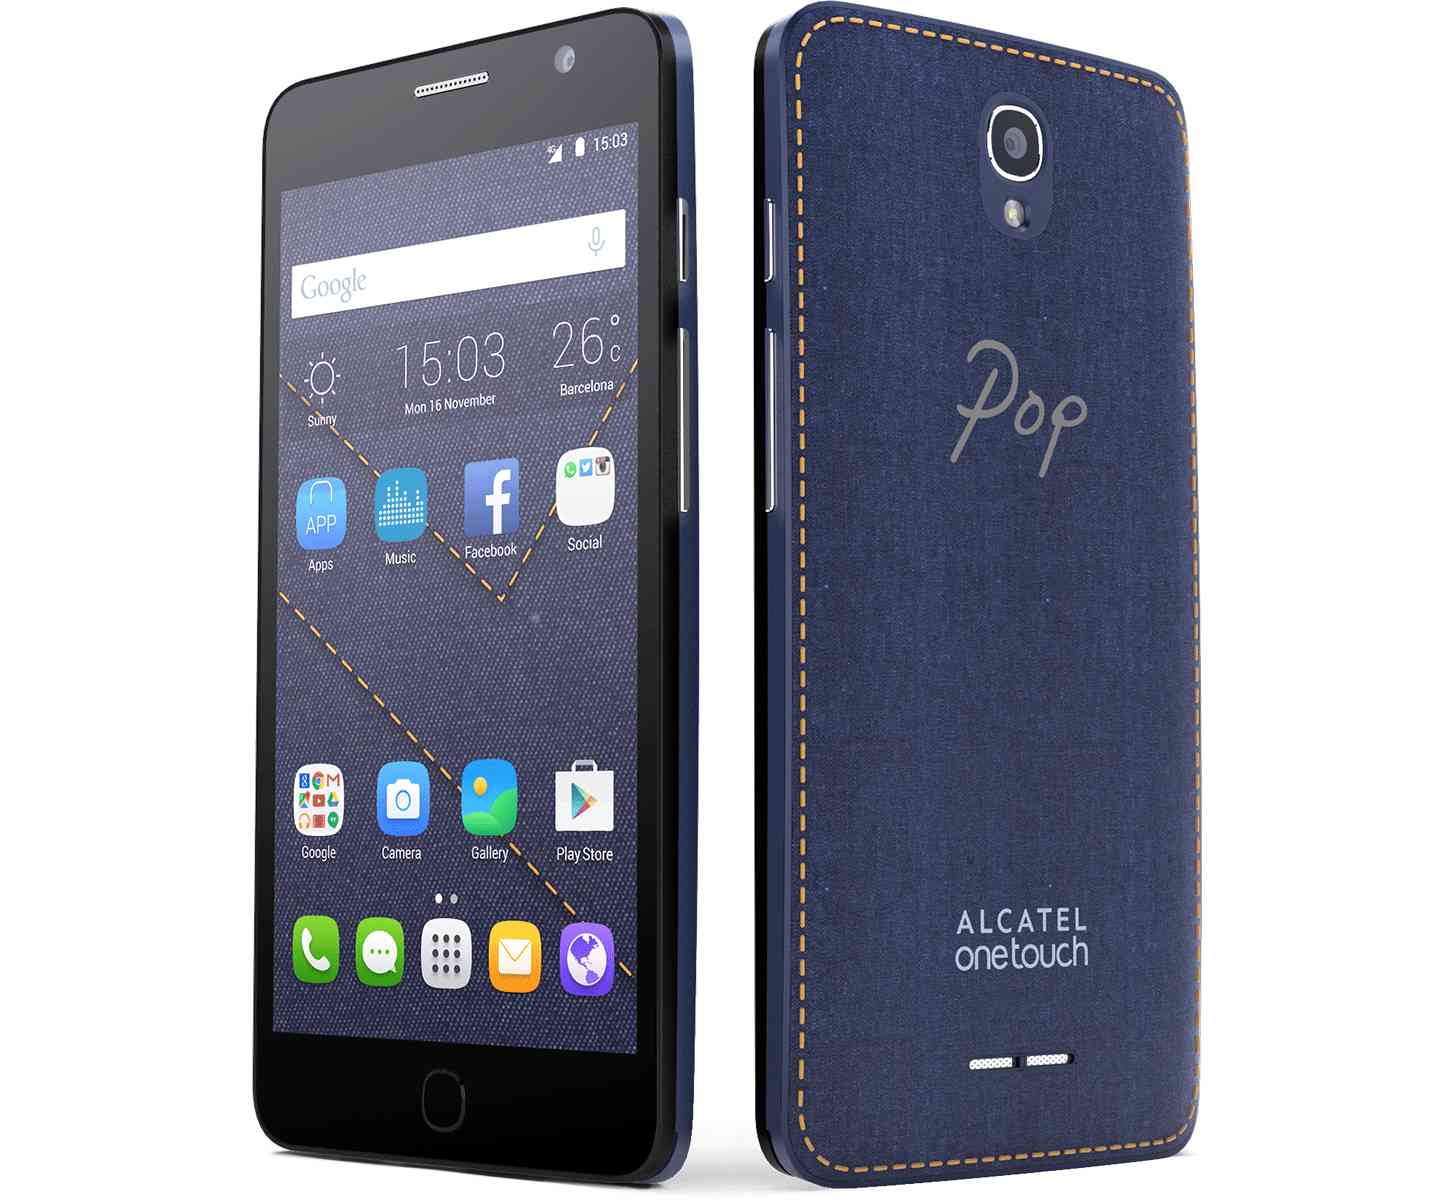 Alcatel One Touch PoP Star mobile_Phone_Price_BD_Specifications_Bangladesh_Reviews3